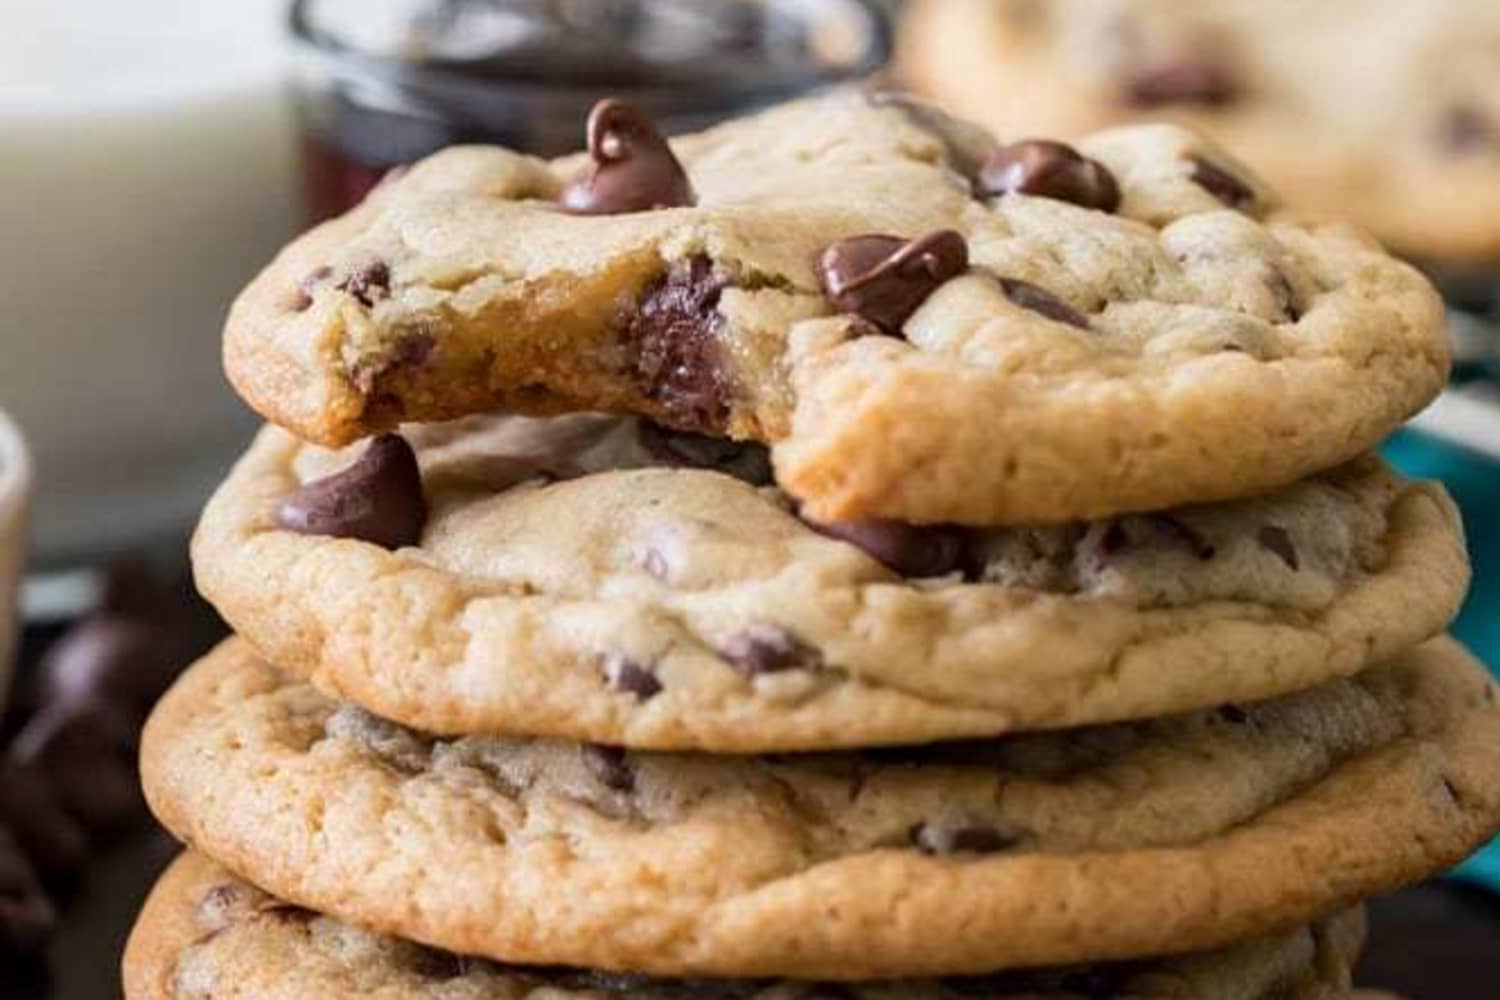 https://cdn.apartmenttherapy.info/image/upload/f_auto,q_auto:eco,c_fill,g_auto,w_1500,ar_3:2/k%2FEdit%2Fworst-chocolate-chip-cookie-recipe-1-of-1